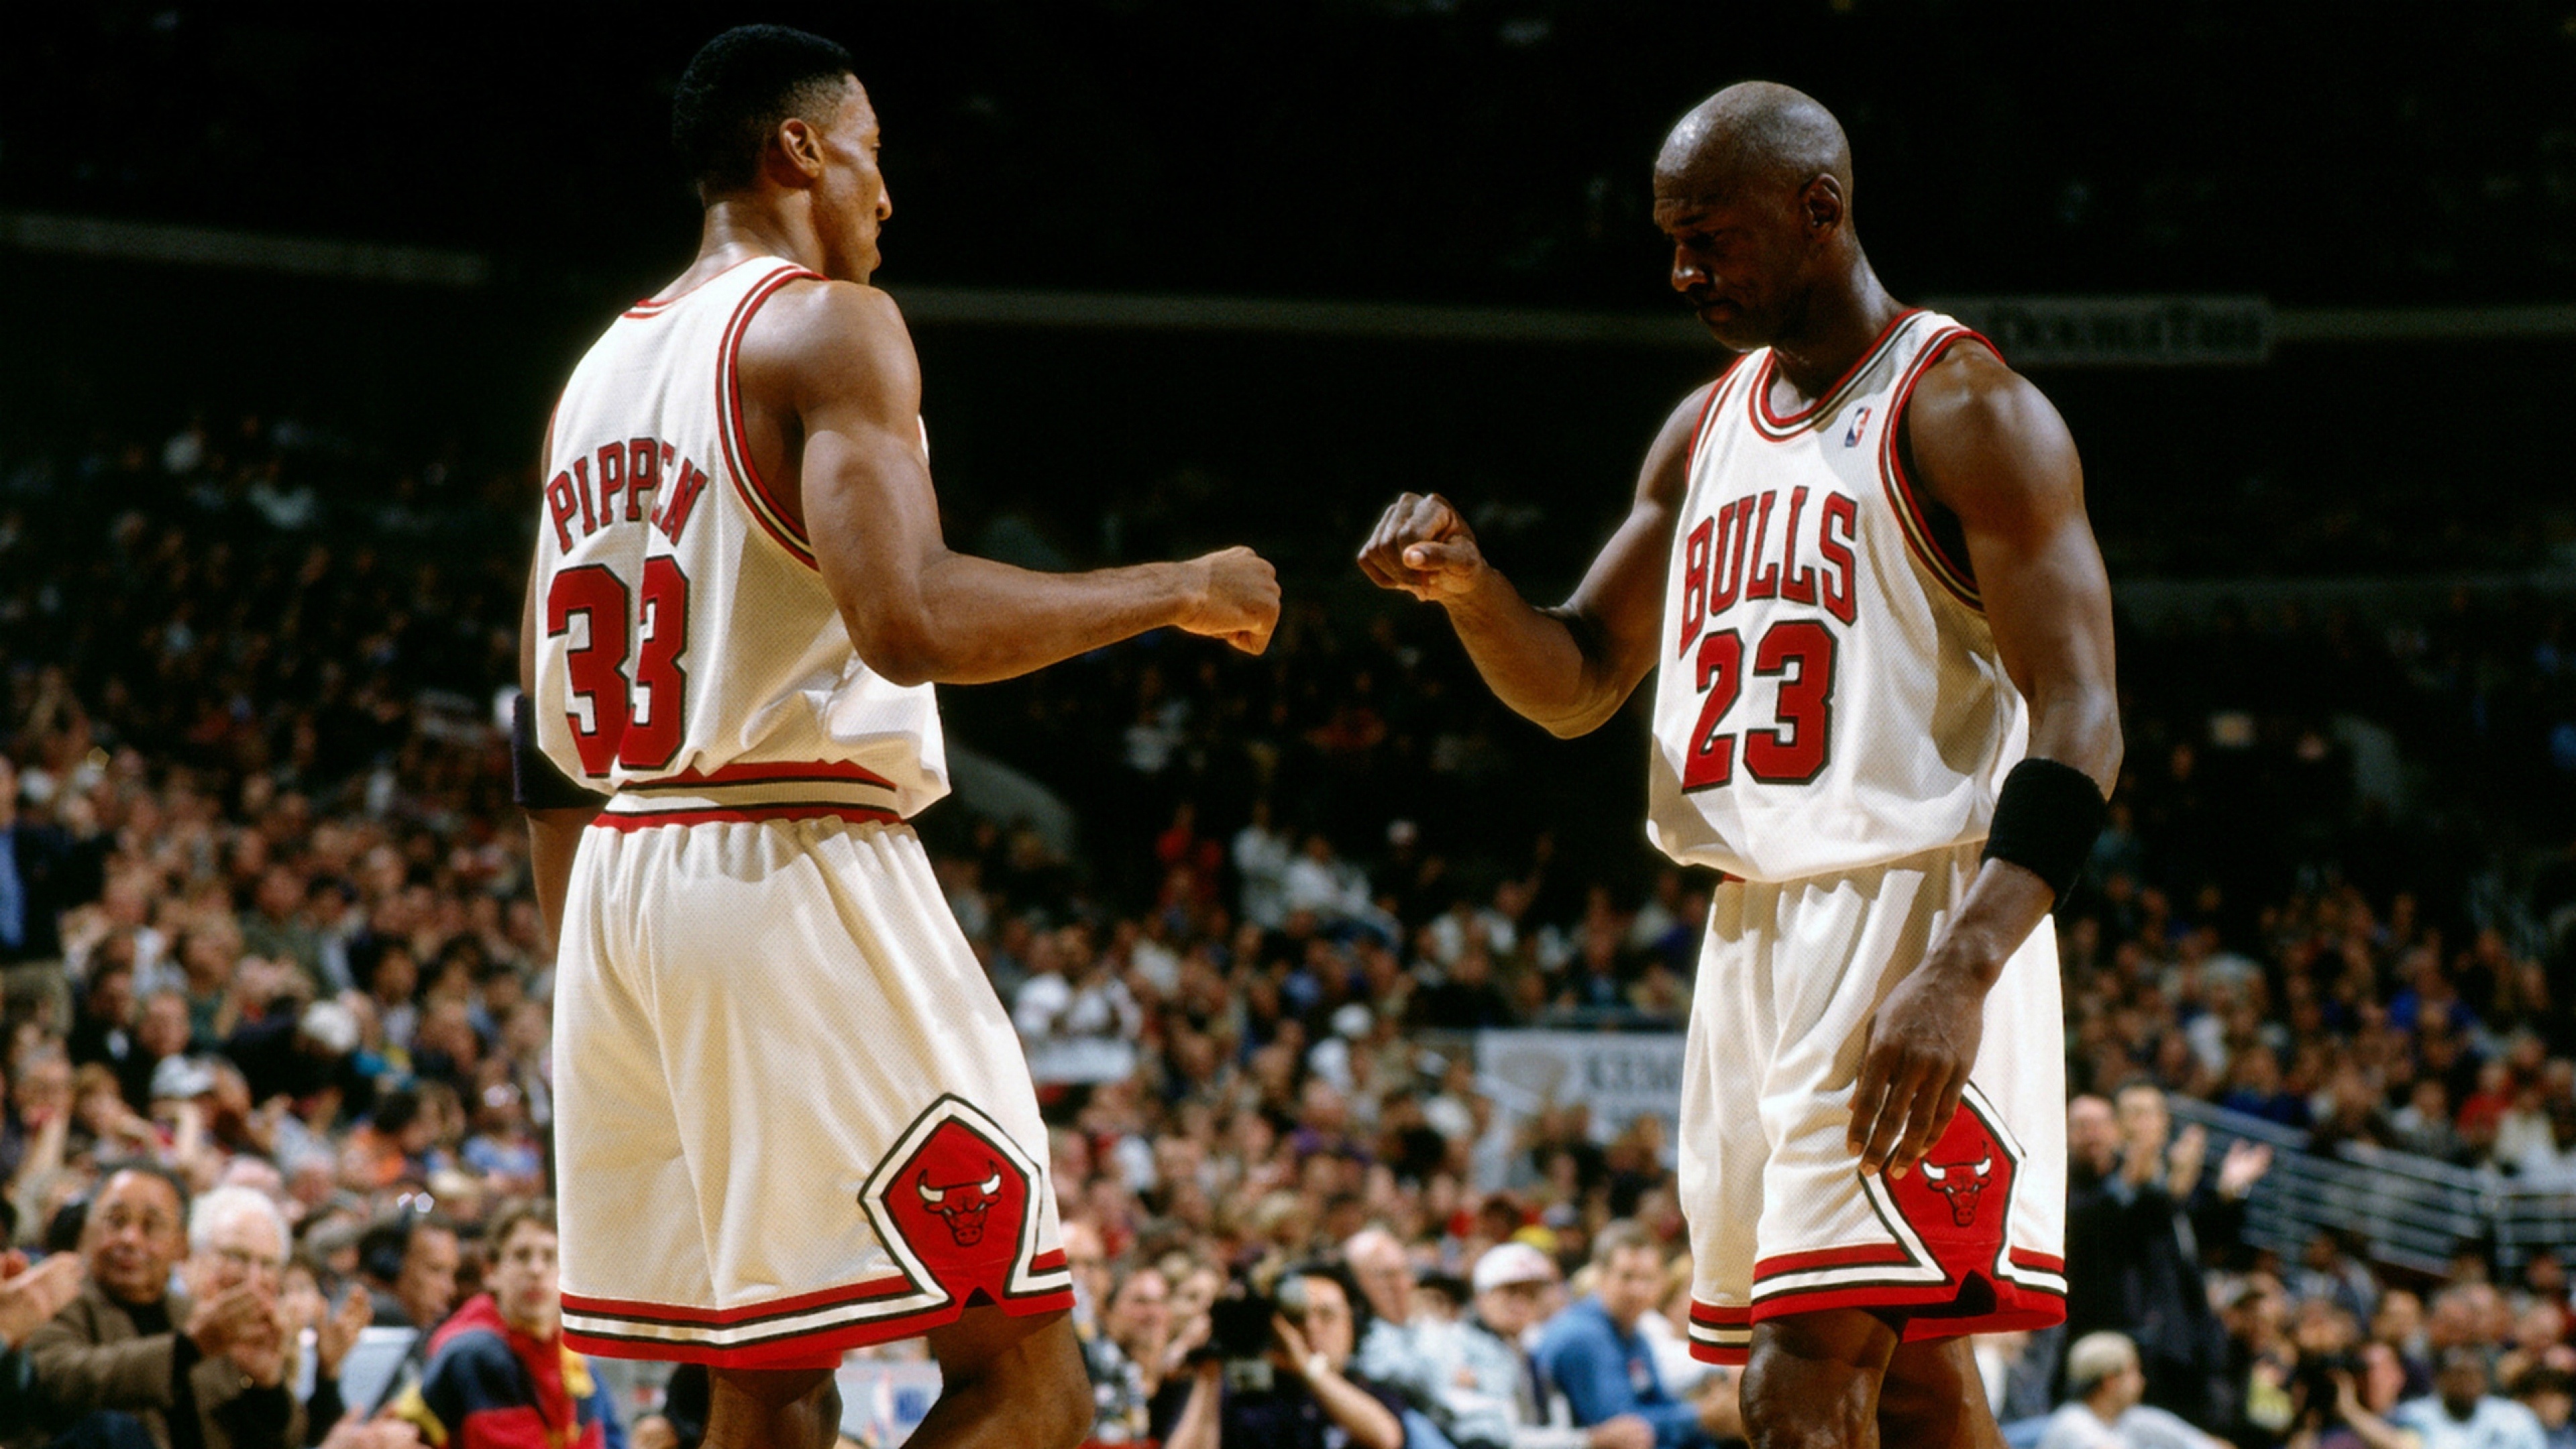 Chicago Bulls: The championship squads were led by Michael Jordan and Scottie Pippen. 3840x2160 4K Background.